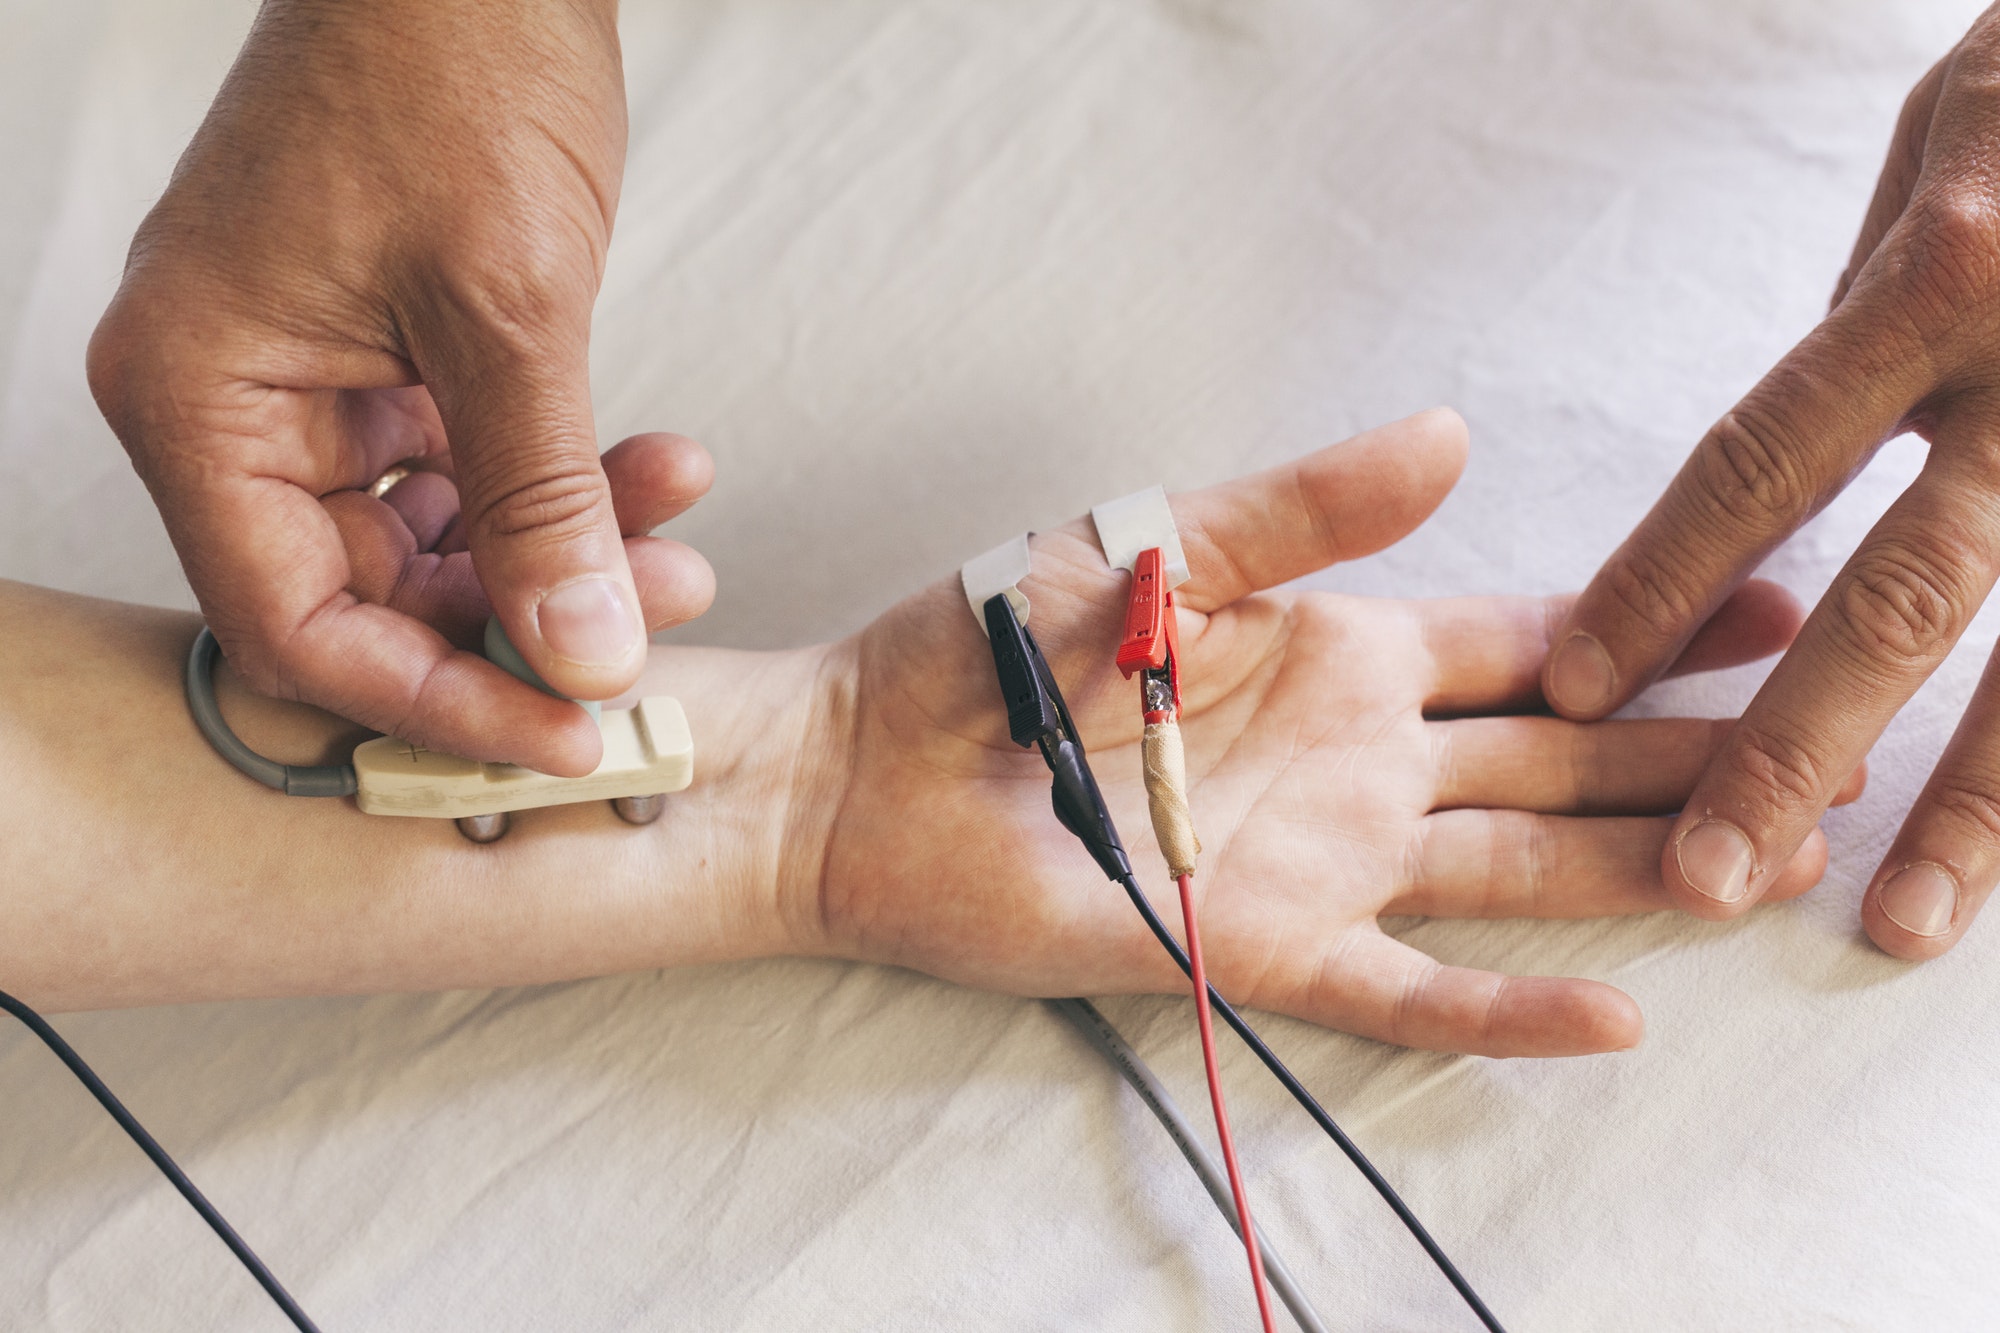 Chiropractor performing a Median NCV electrotherapy